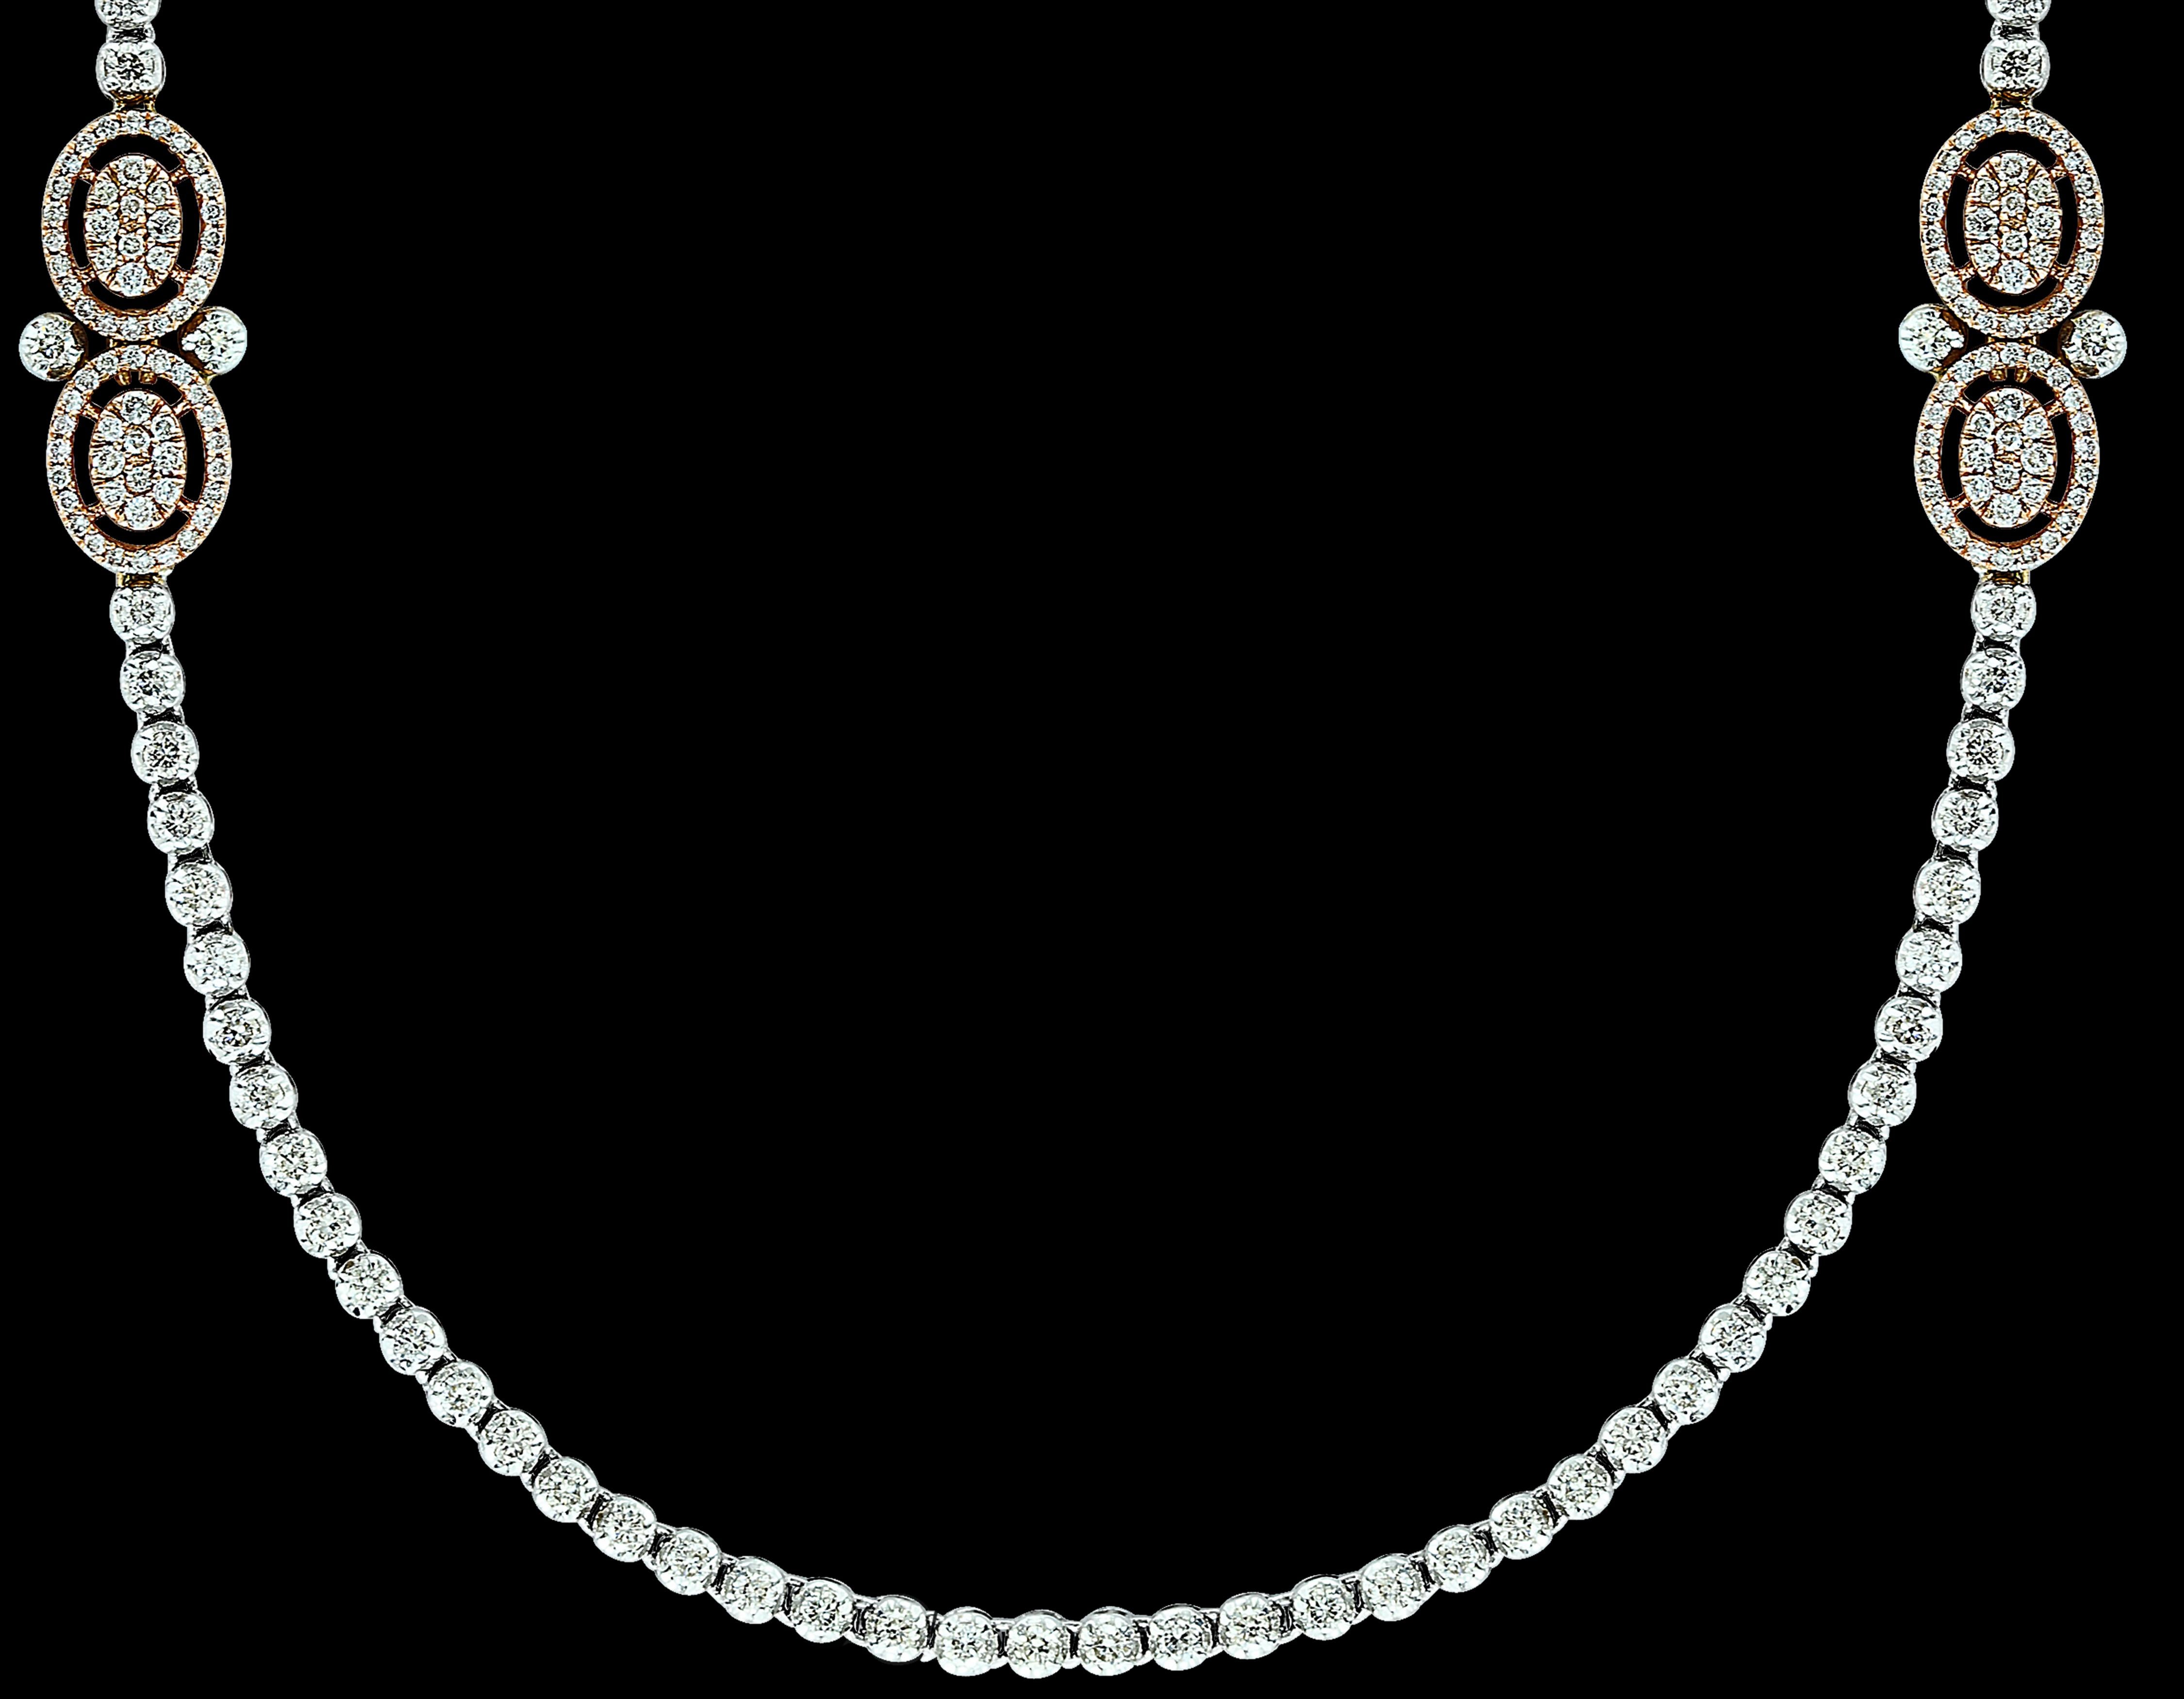 8 Ct Brilliant Cut Diamond Long Necklace in White & Pink 14 K Gold 27 Gm 16